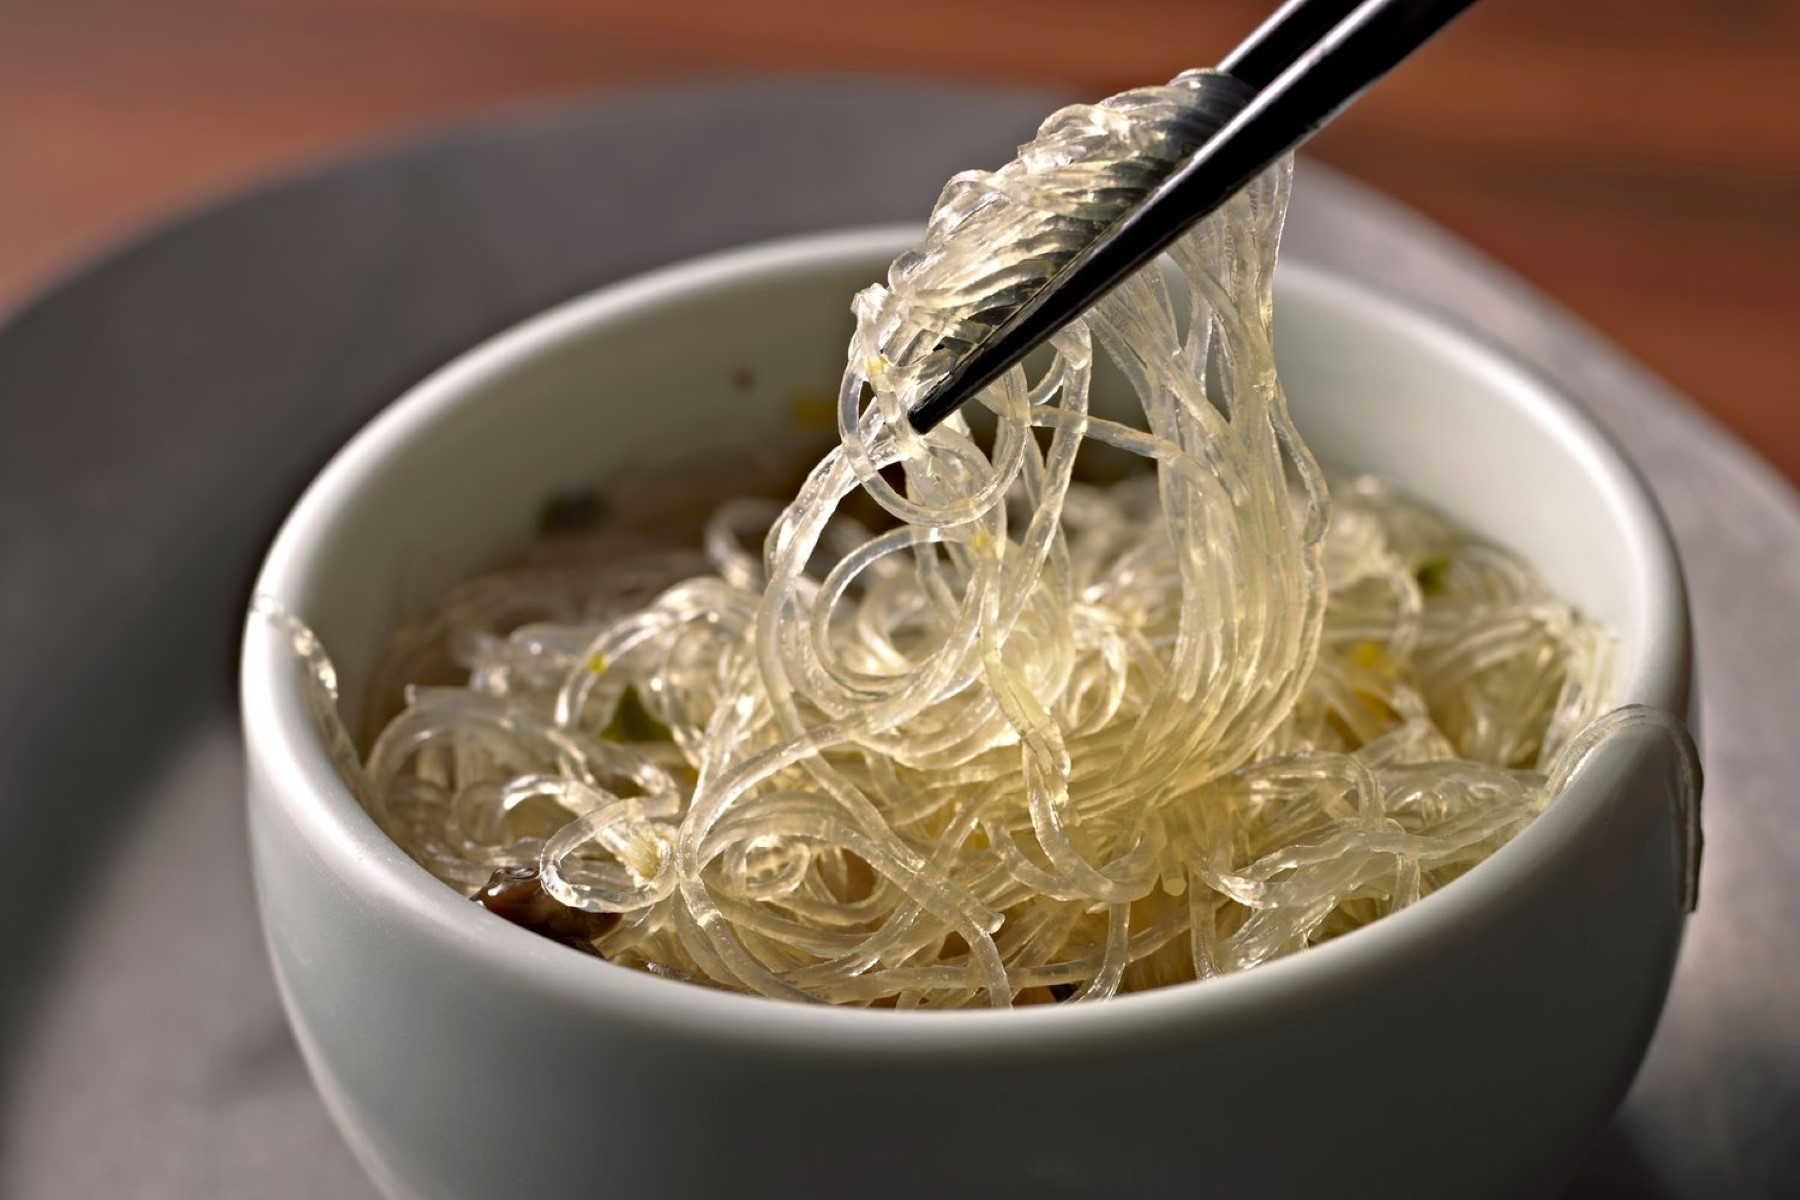 What Are Glass Noodles Made Of